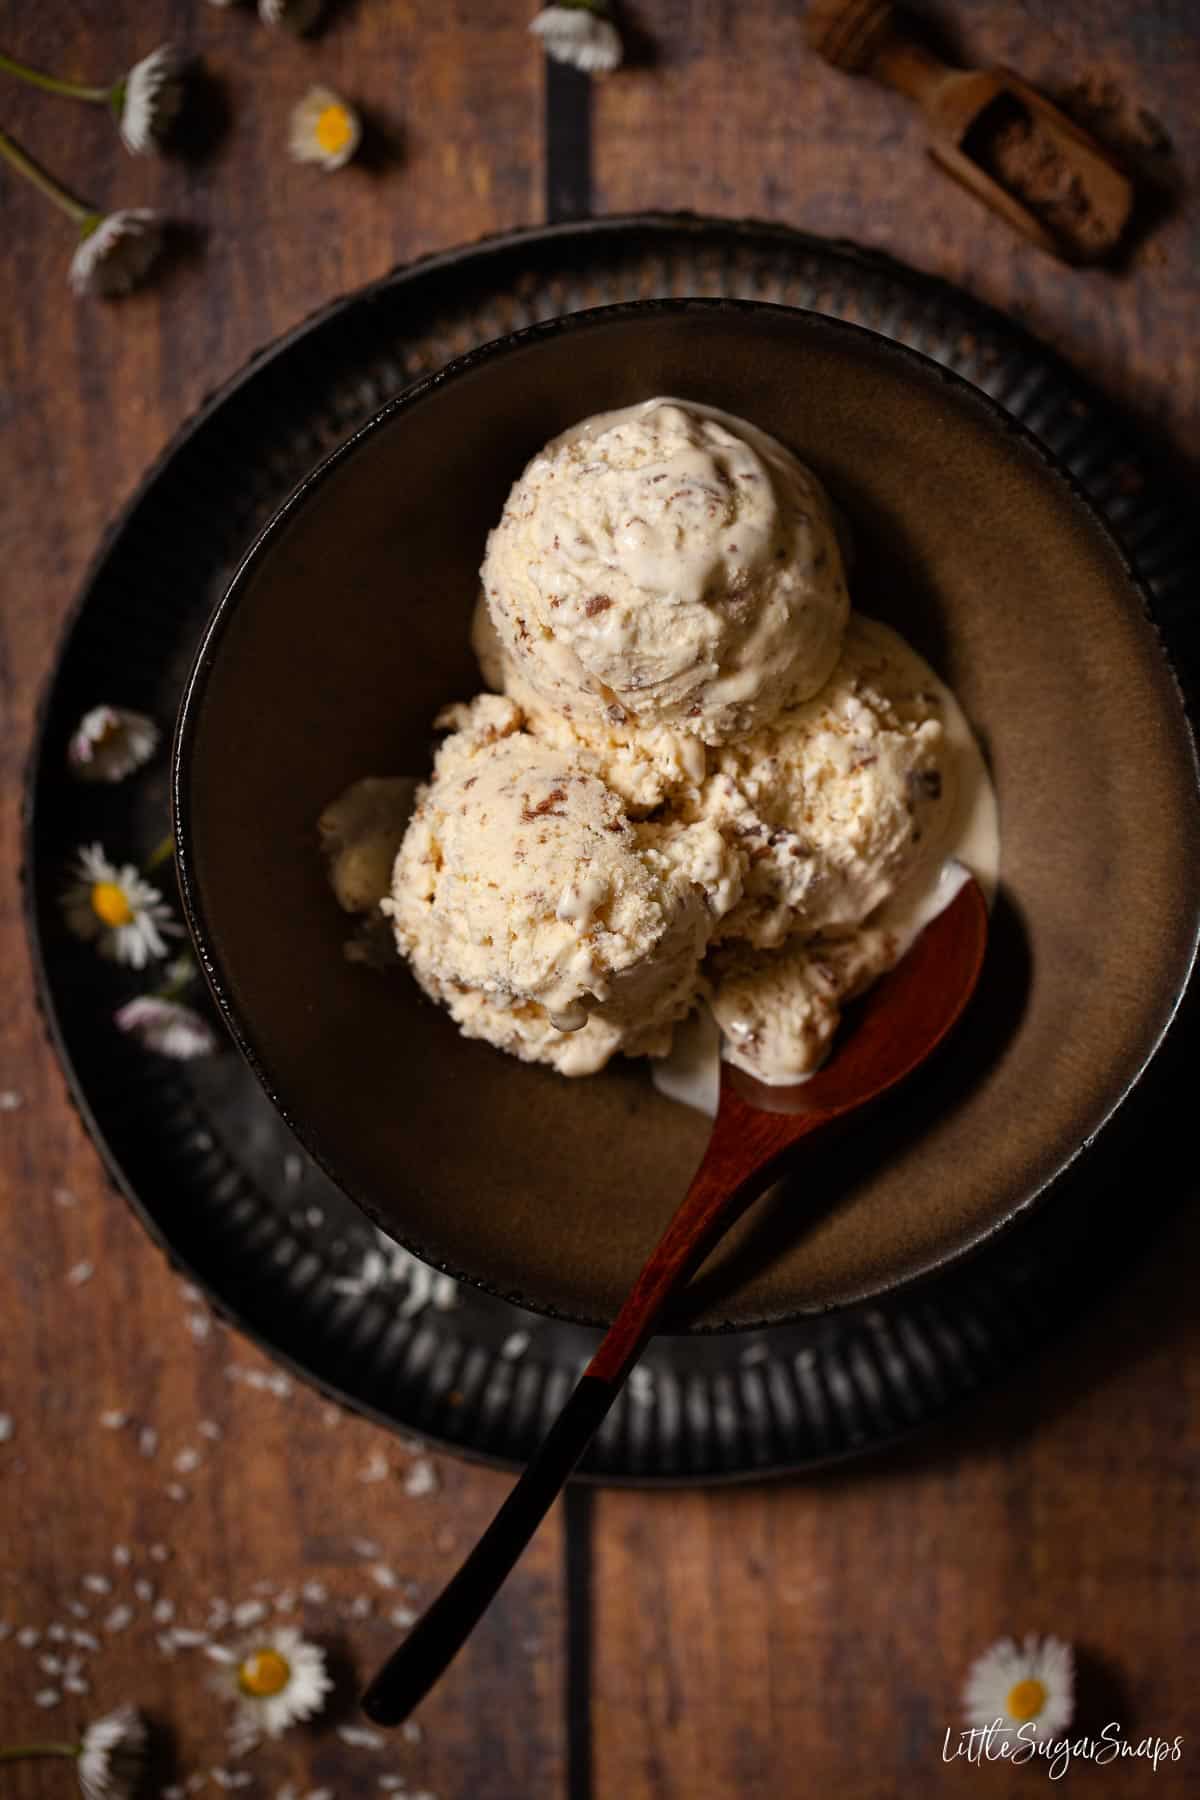 Coconut bounty bar inspired ice cream in a bowl